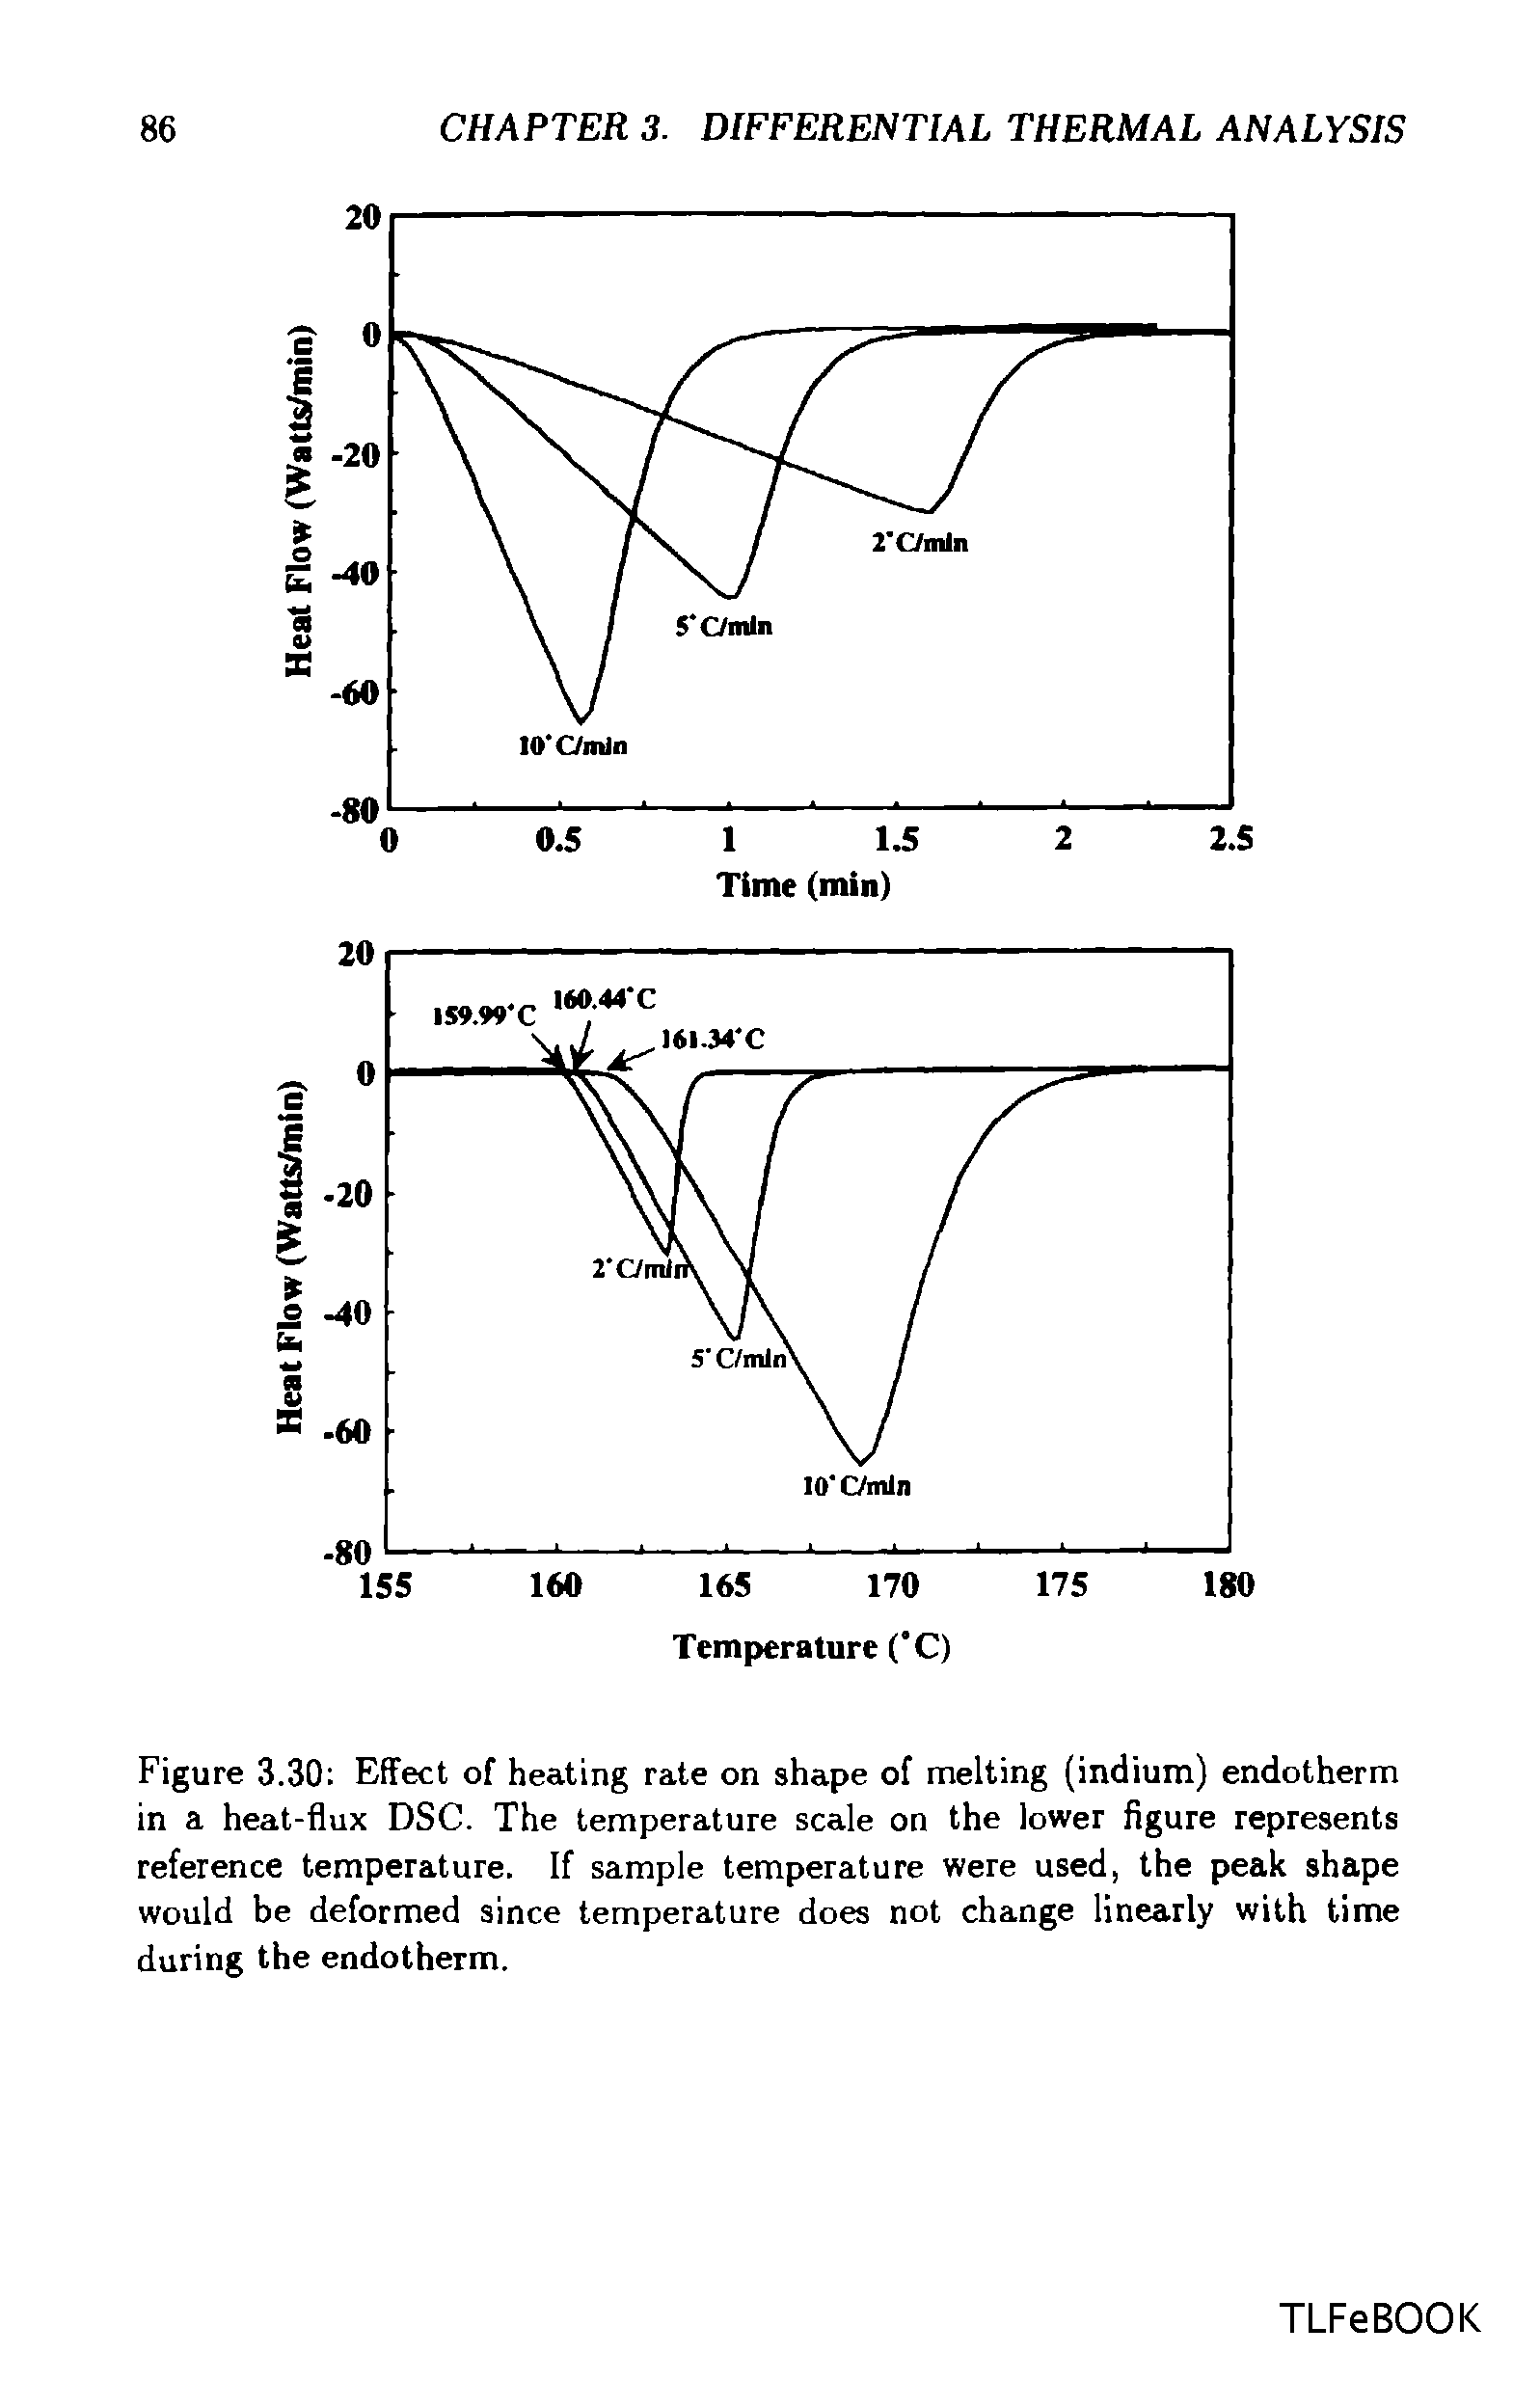 Figure 3.30 Effect of heating rate on shape of melting (indium) endotherm in a heat-flux DSC. The temperature scale on the lower figure represents reference temperature. If sample temperature were used, the peak shape would be deformed since temperature does not change linearly with time during the endotherm.